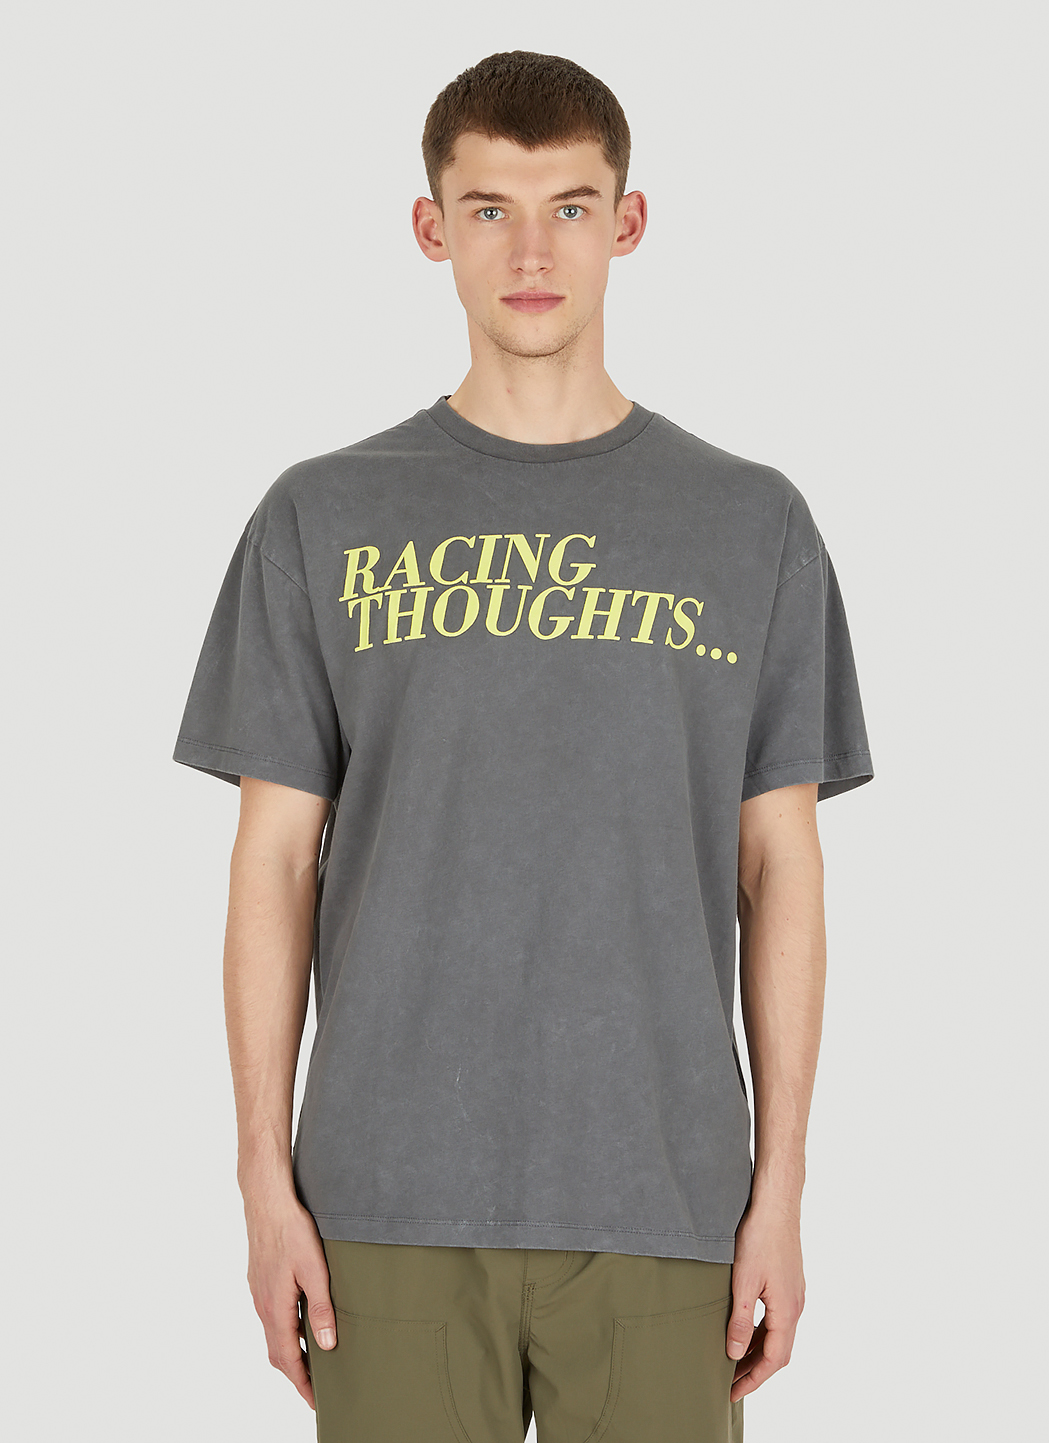 Racing Thoughts T-Shirt